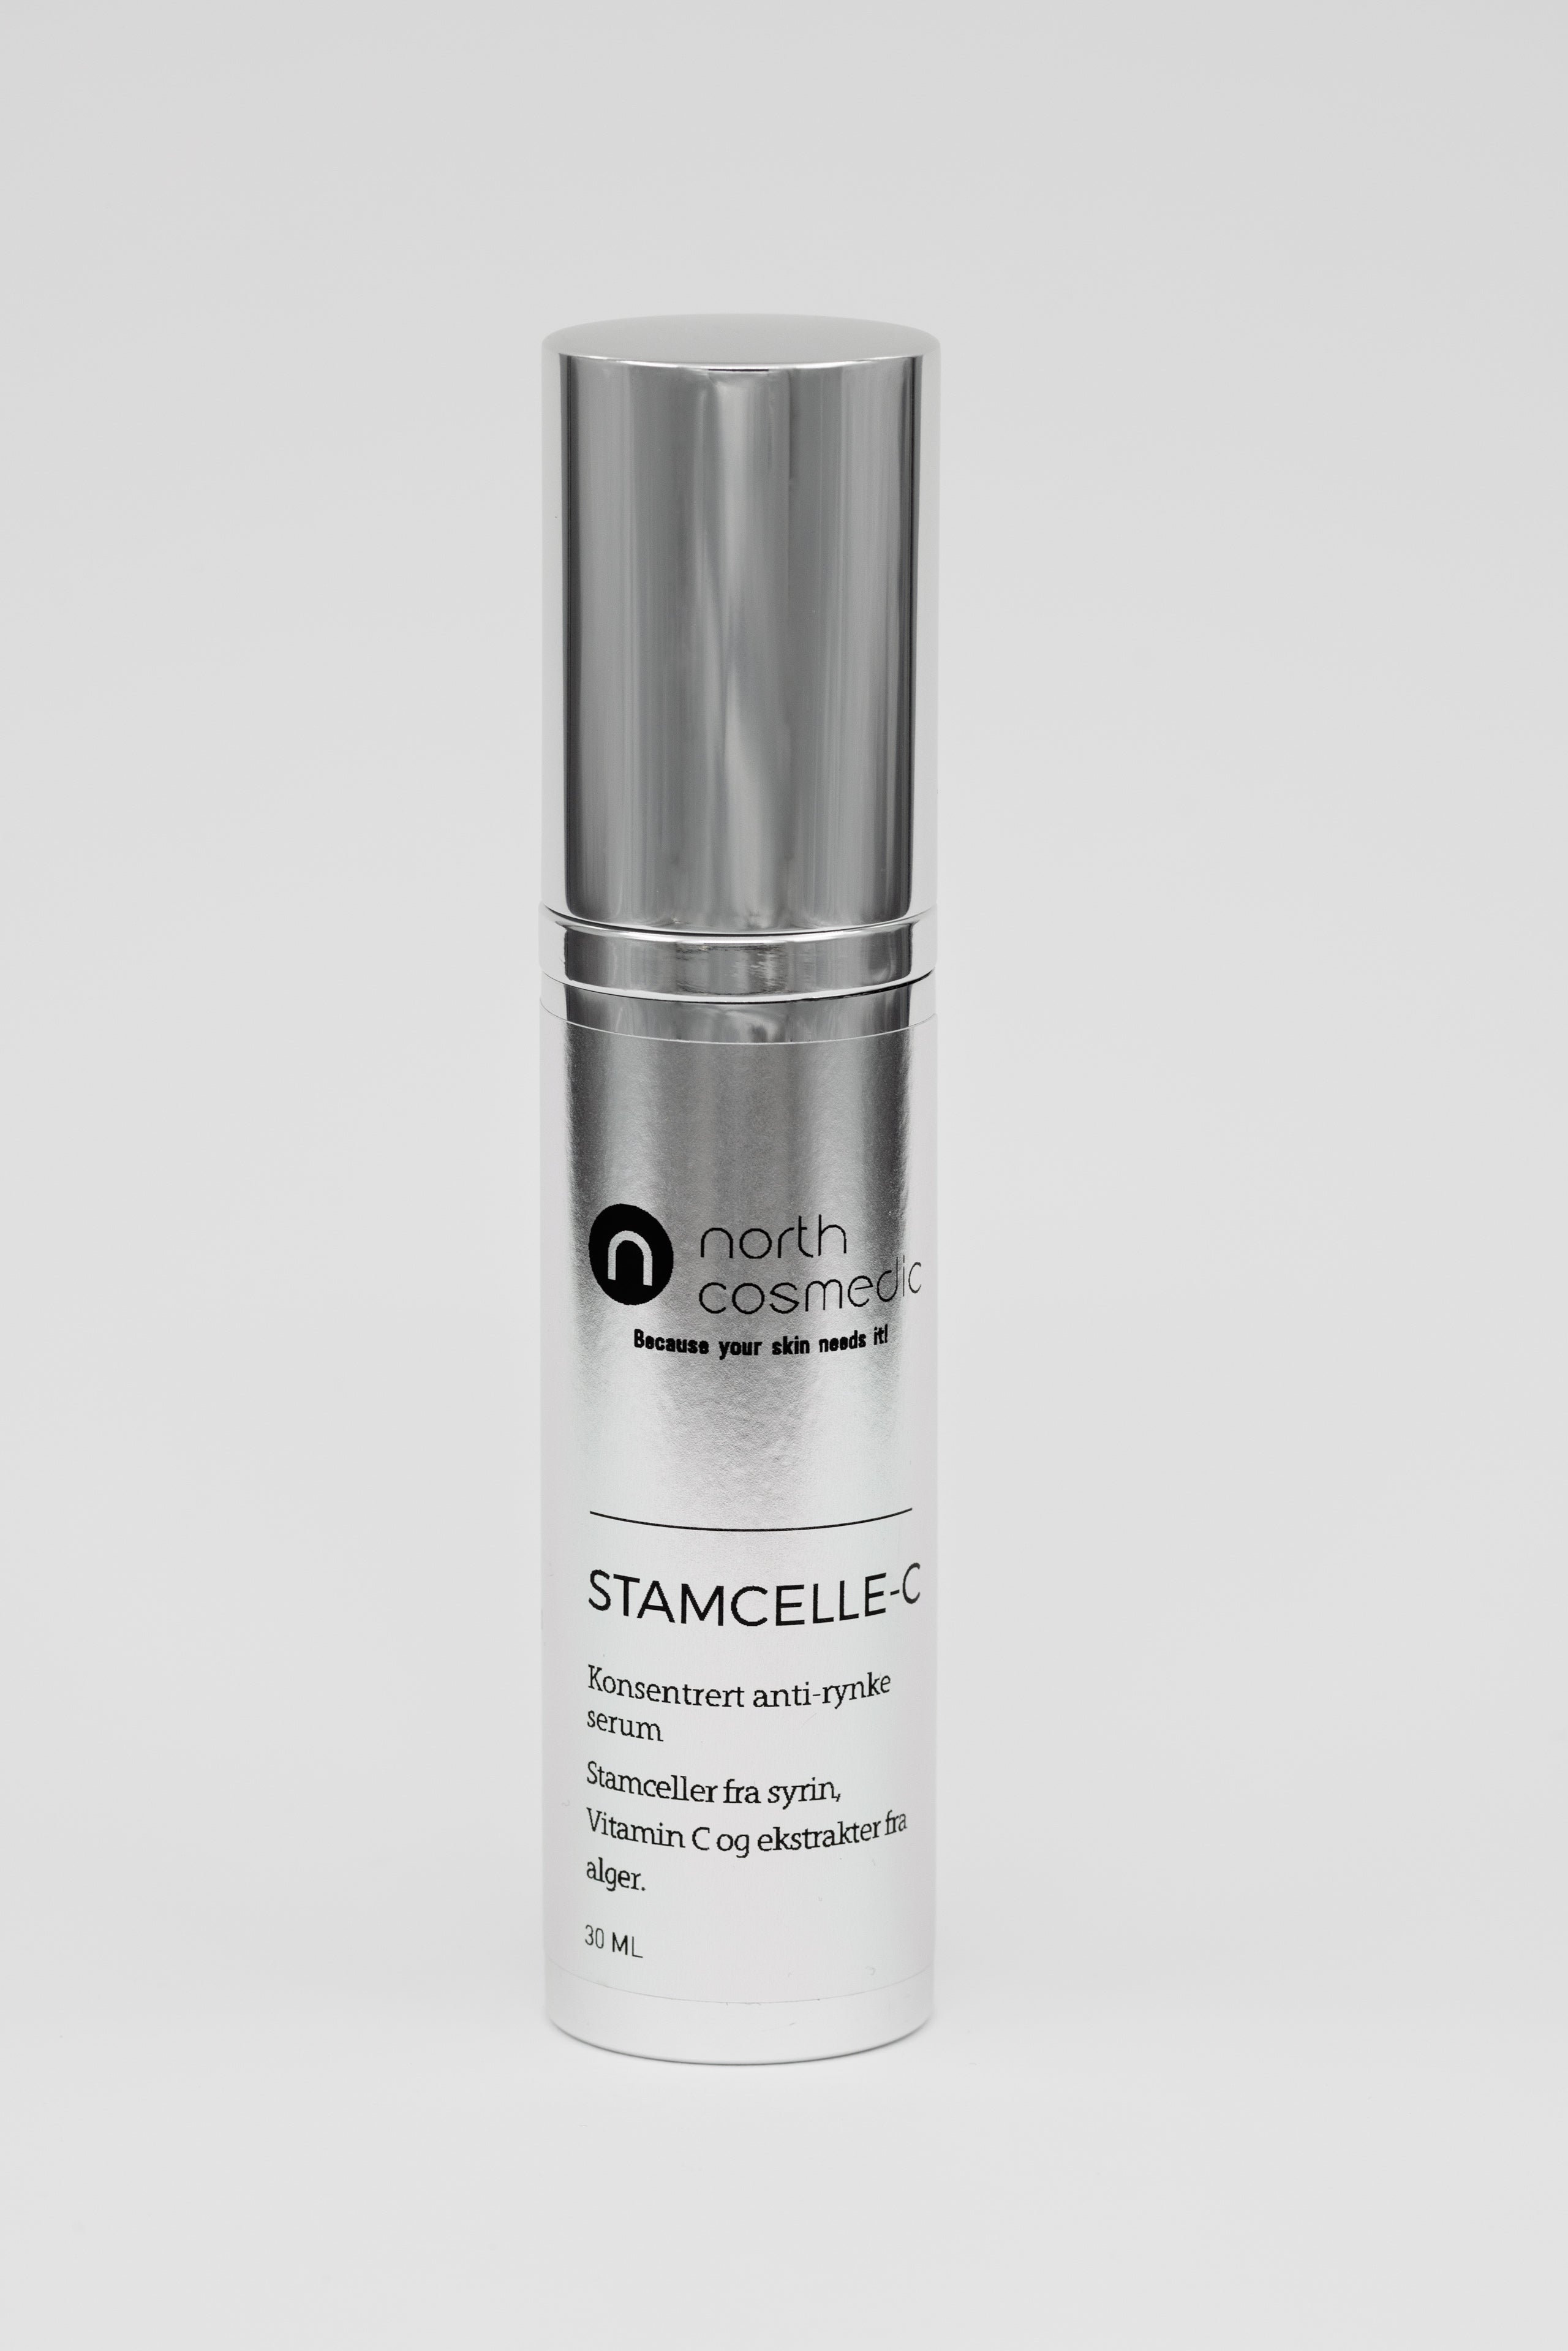 North Cosmedic Stamcelle-C 30ML